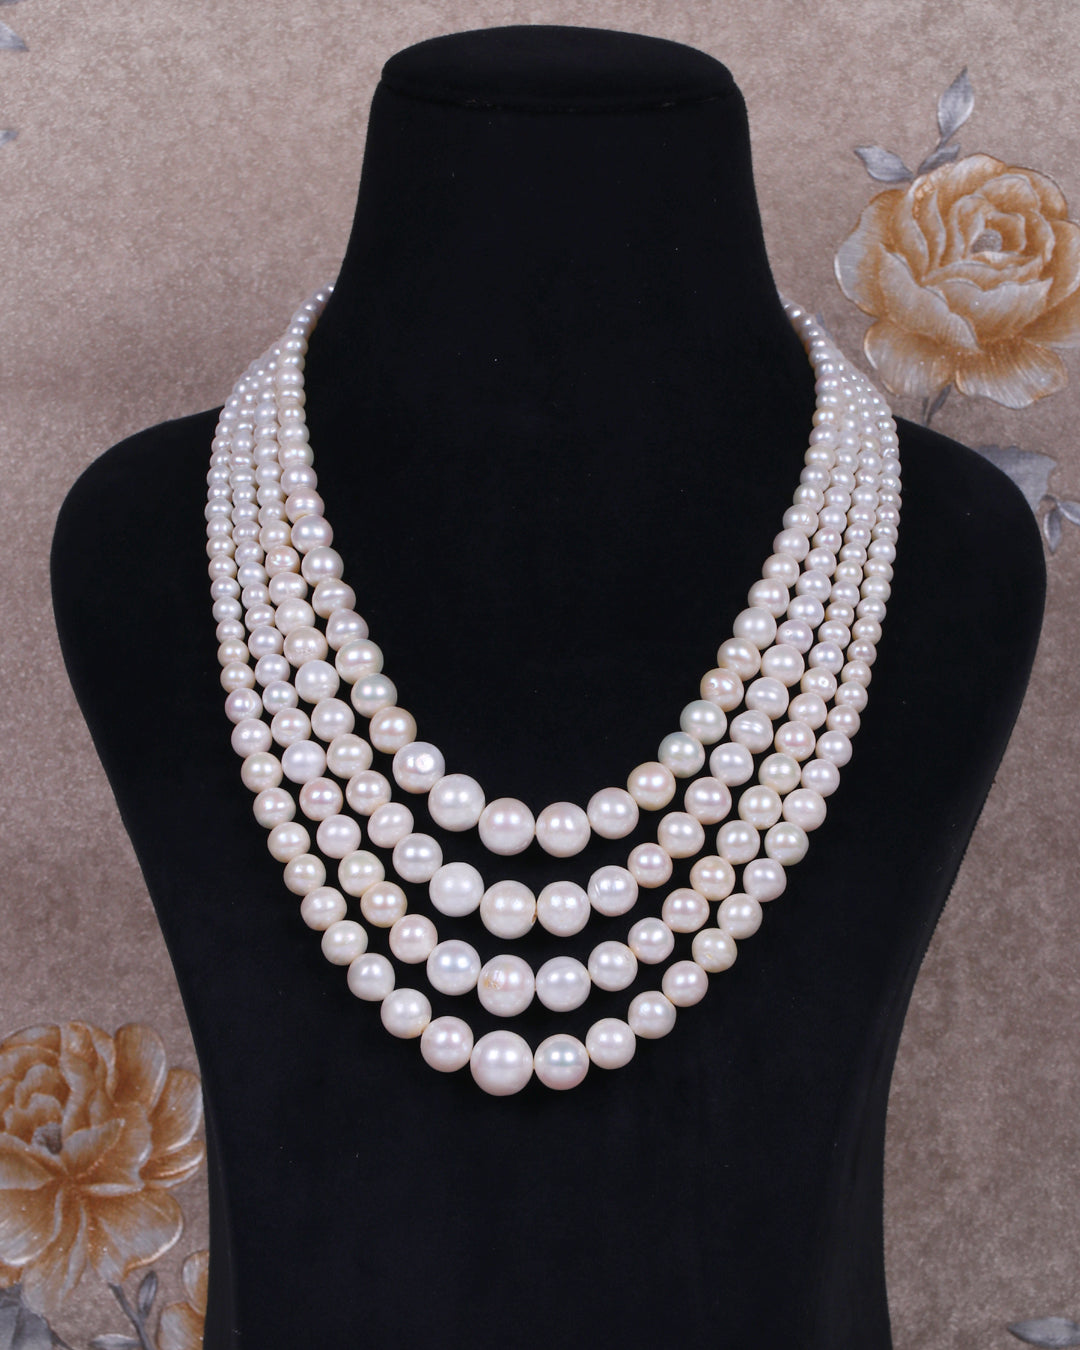 Natural Freshwater Pearl Gemstone Round Beads Necklace Jewelry